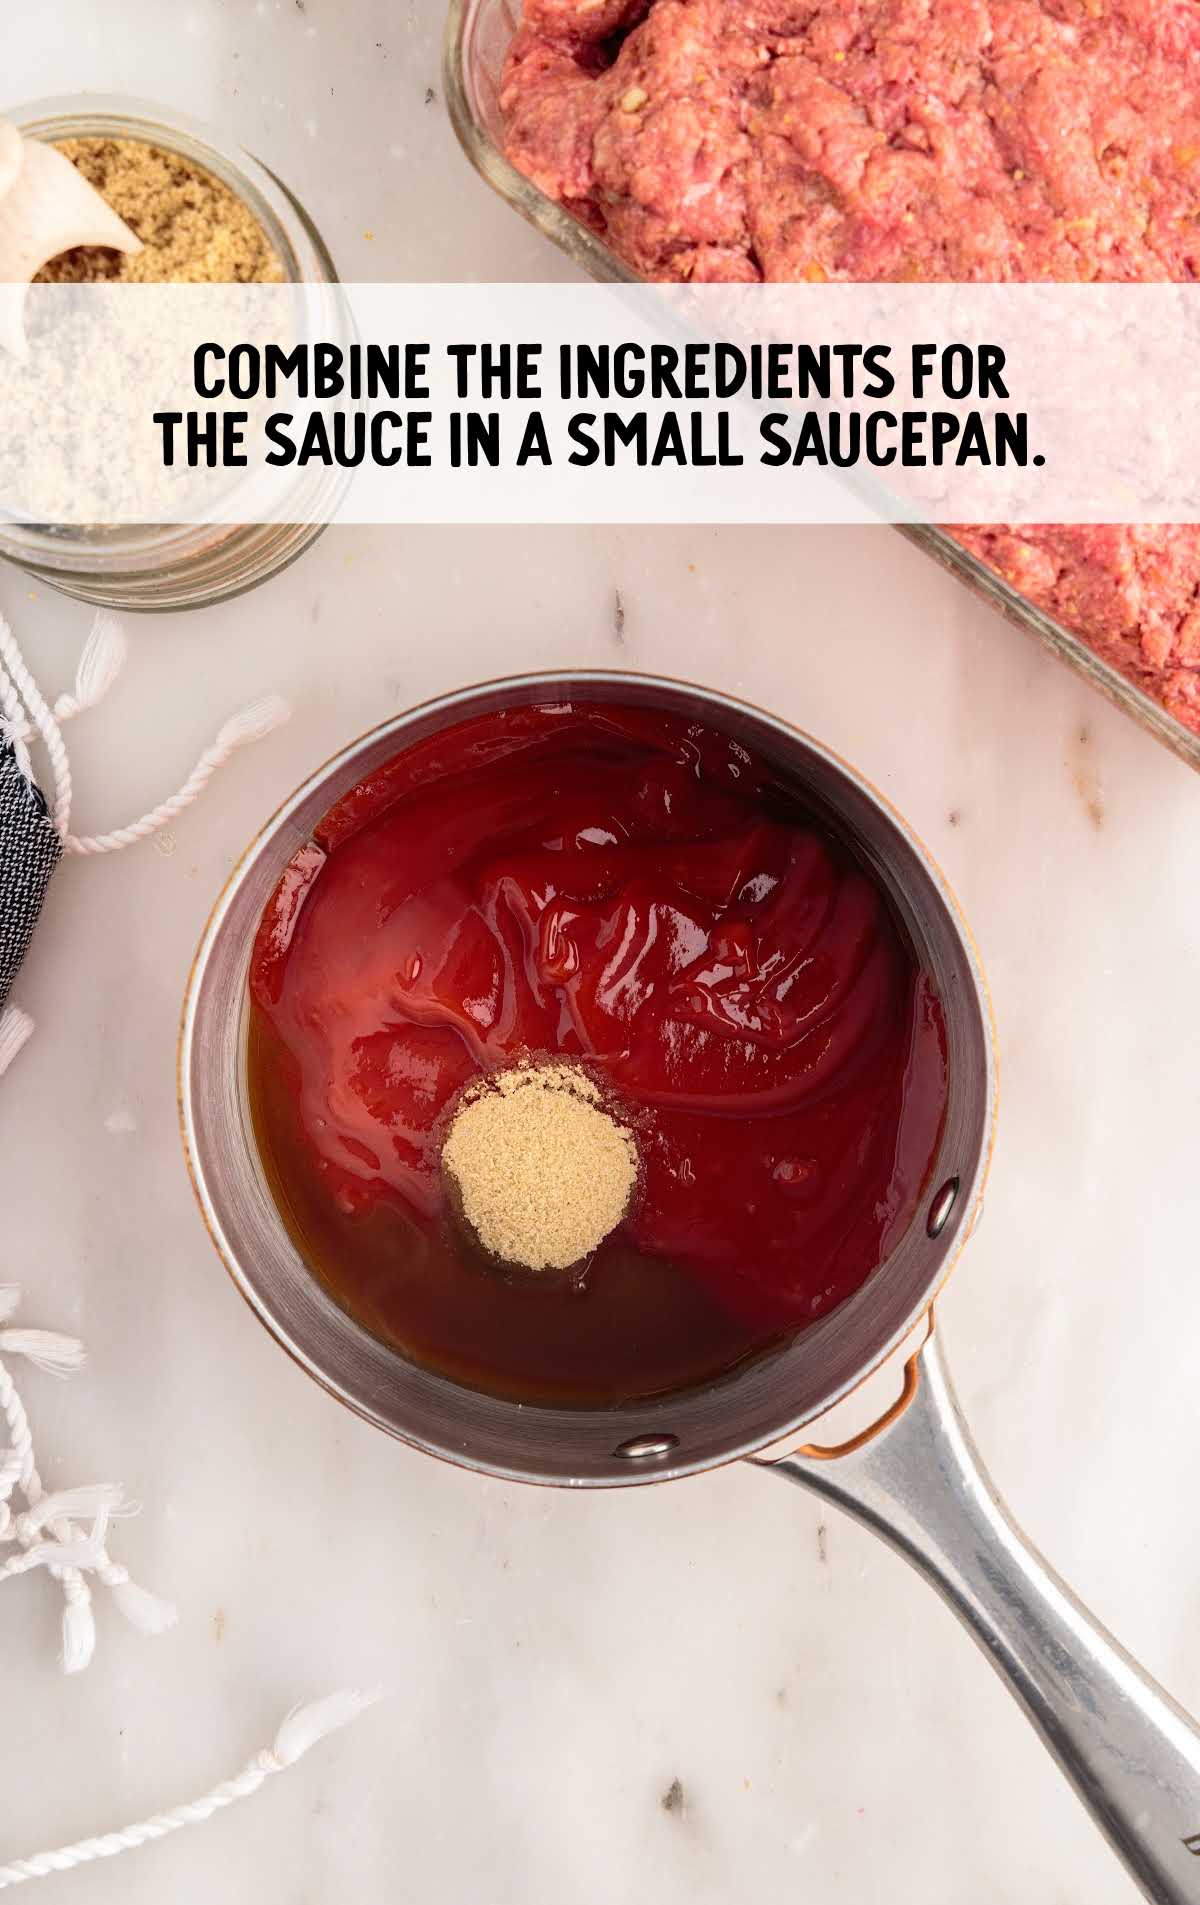 sauce ingredients combined in a saucepan